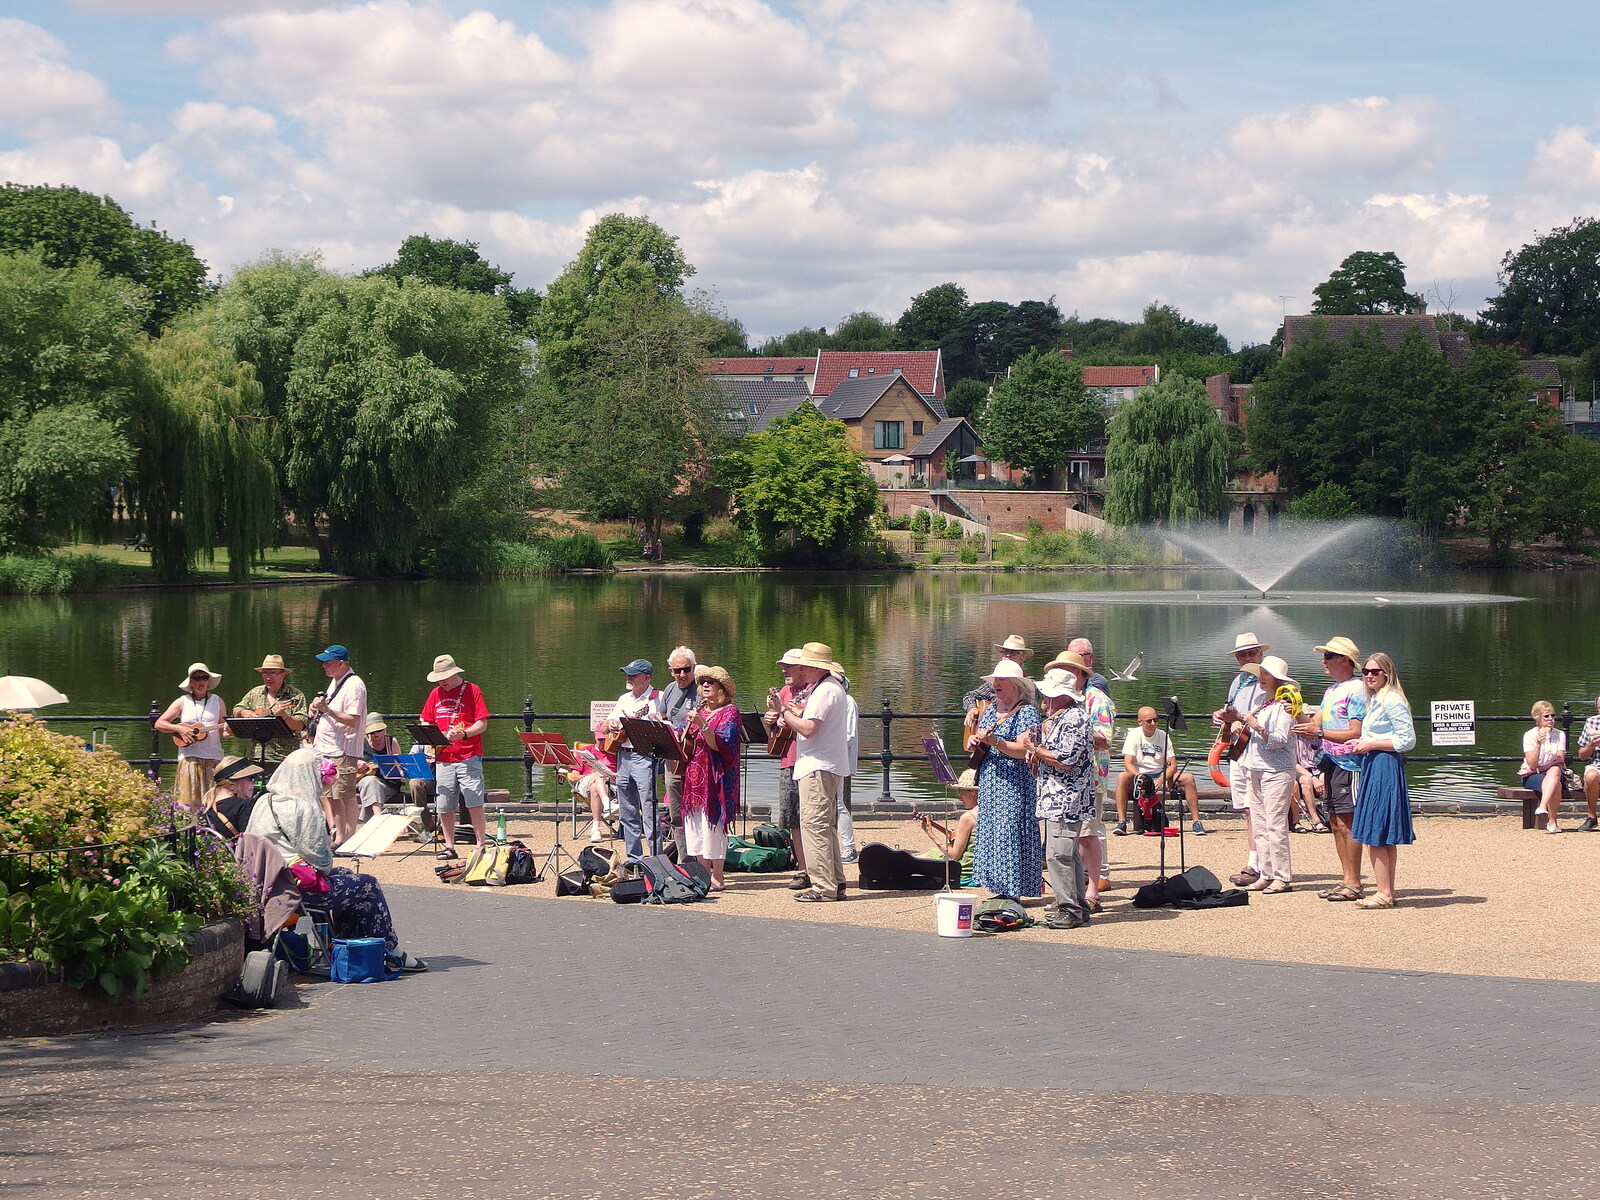 There's a ukulele band playing by the Mere in Diss from A Ride to Walsham Le Willows, Suffolk - 15th July 2022